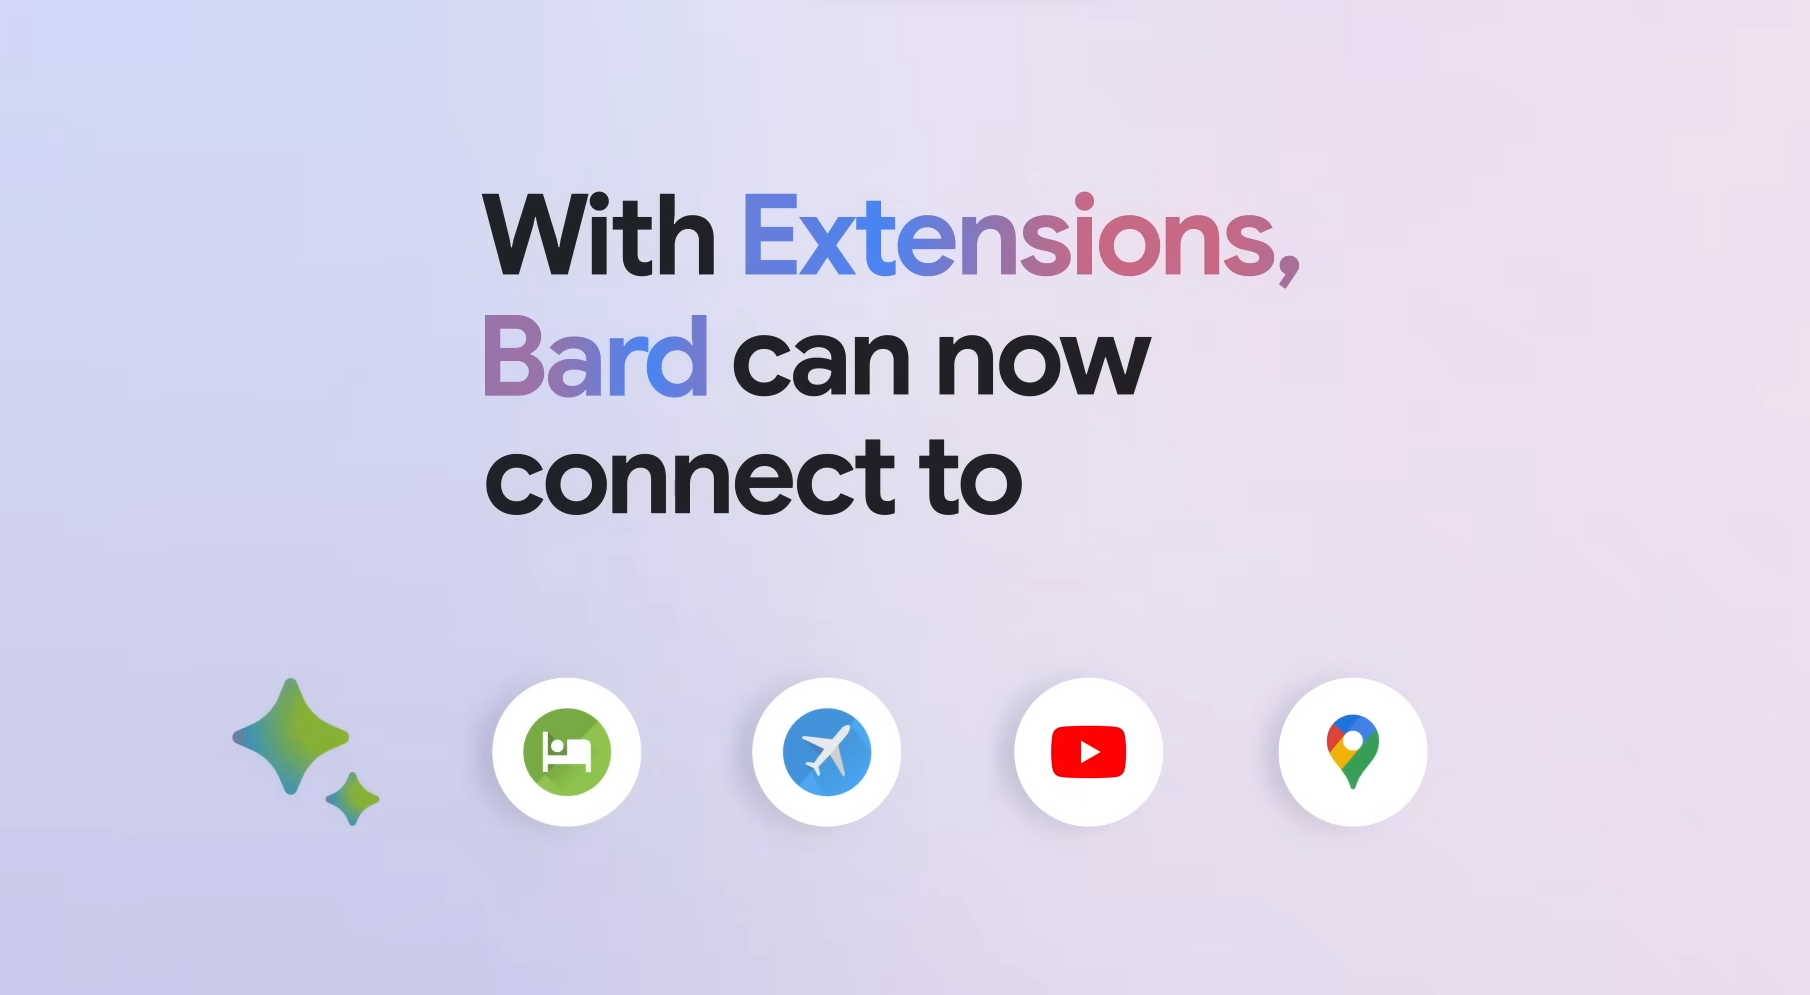 Use Bard to get a quick summary of YouTube videos